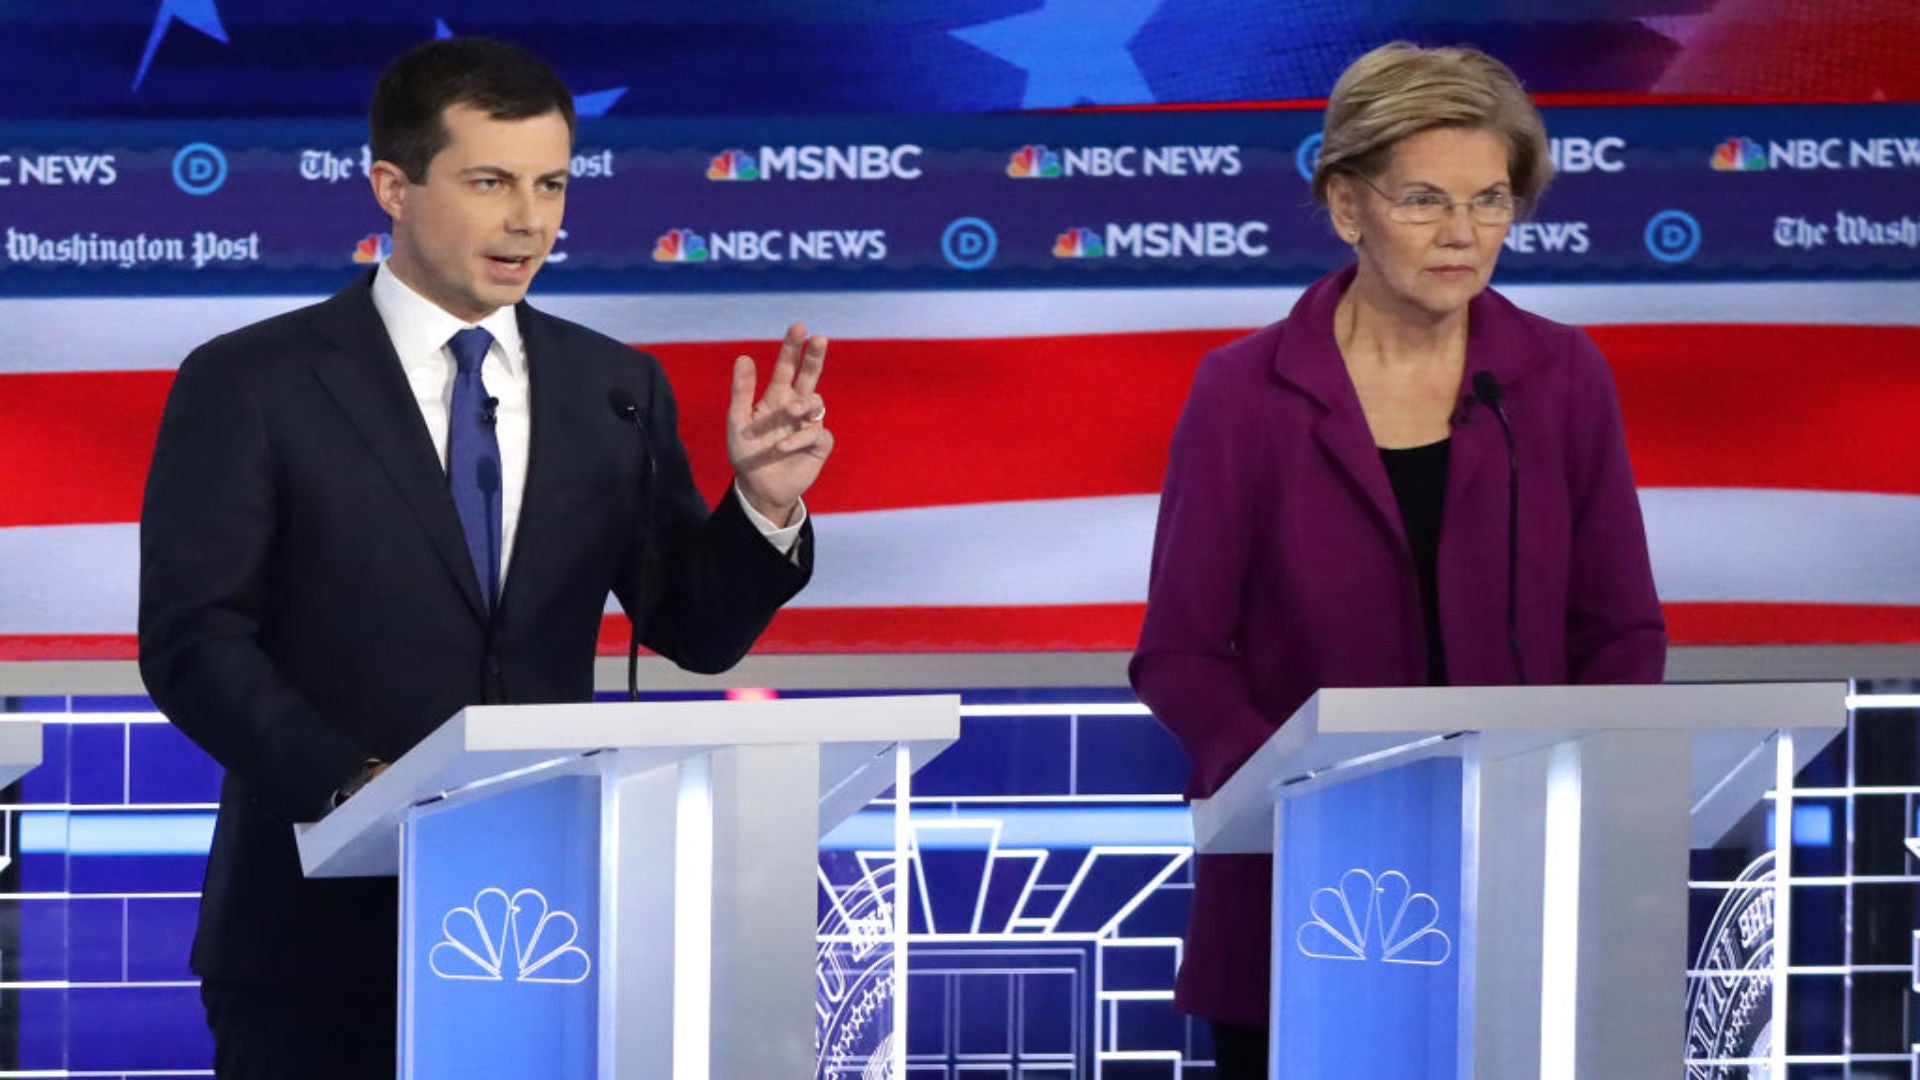 Warren Earned $1.9 Million For Private Legal Work; Buttigieg Tells Shady Consulting Firm To Release His Client List